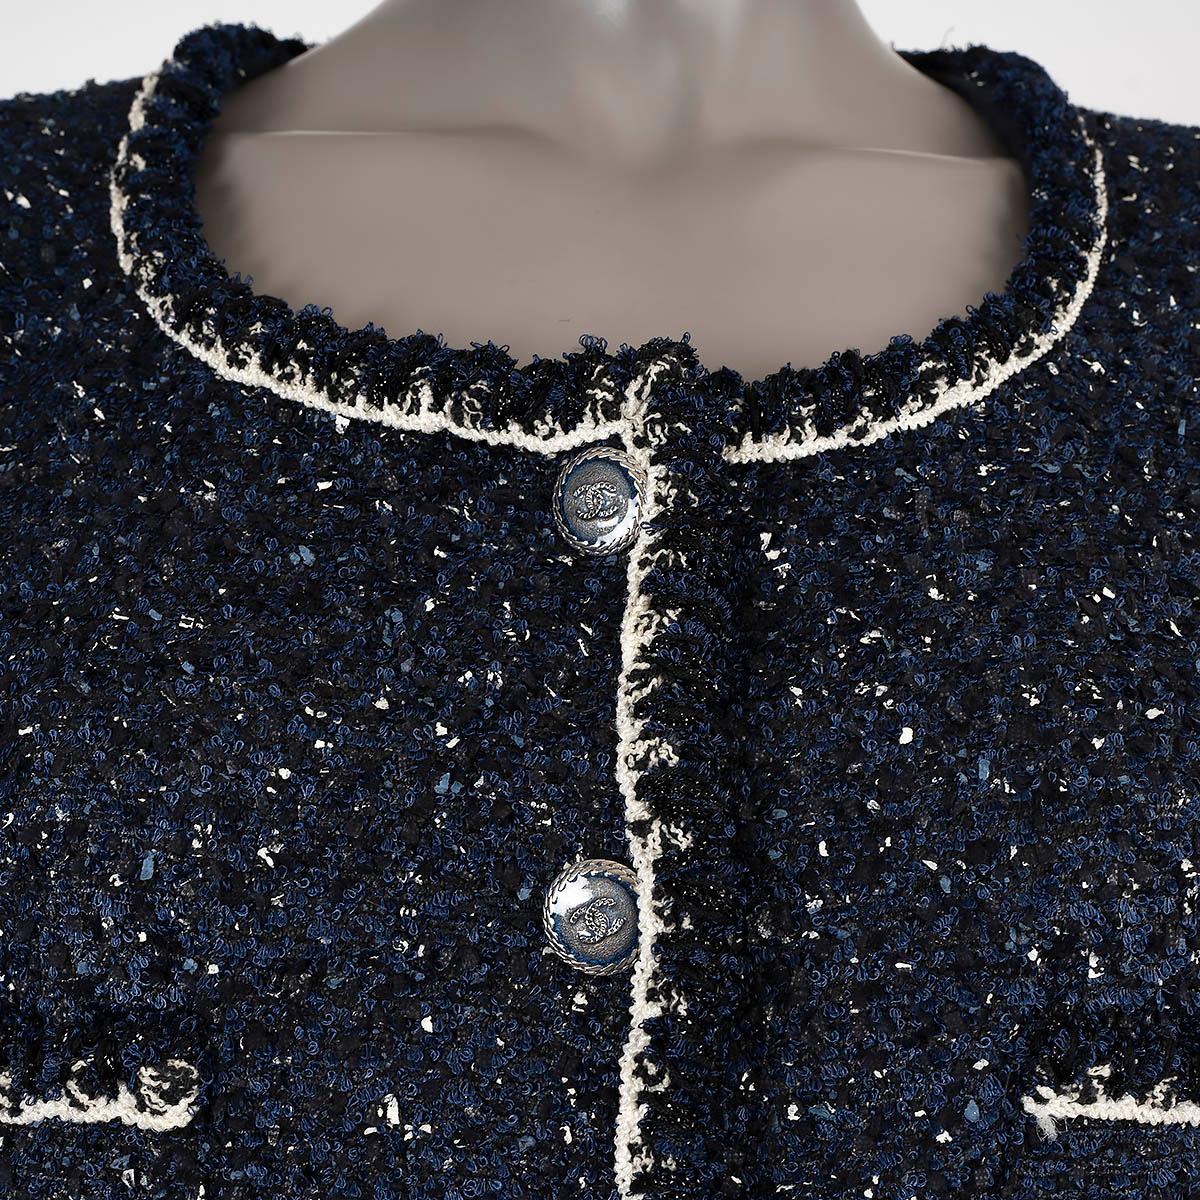 CHANEL navy & black 2012 12P PANELLED TWEED Dress 38 S For Sale 2